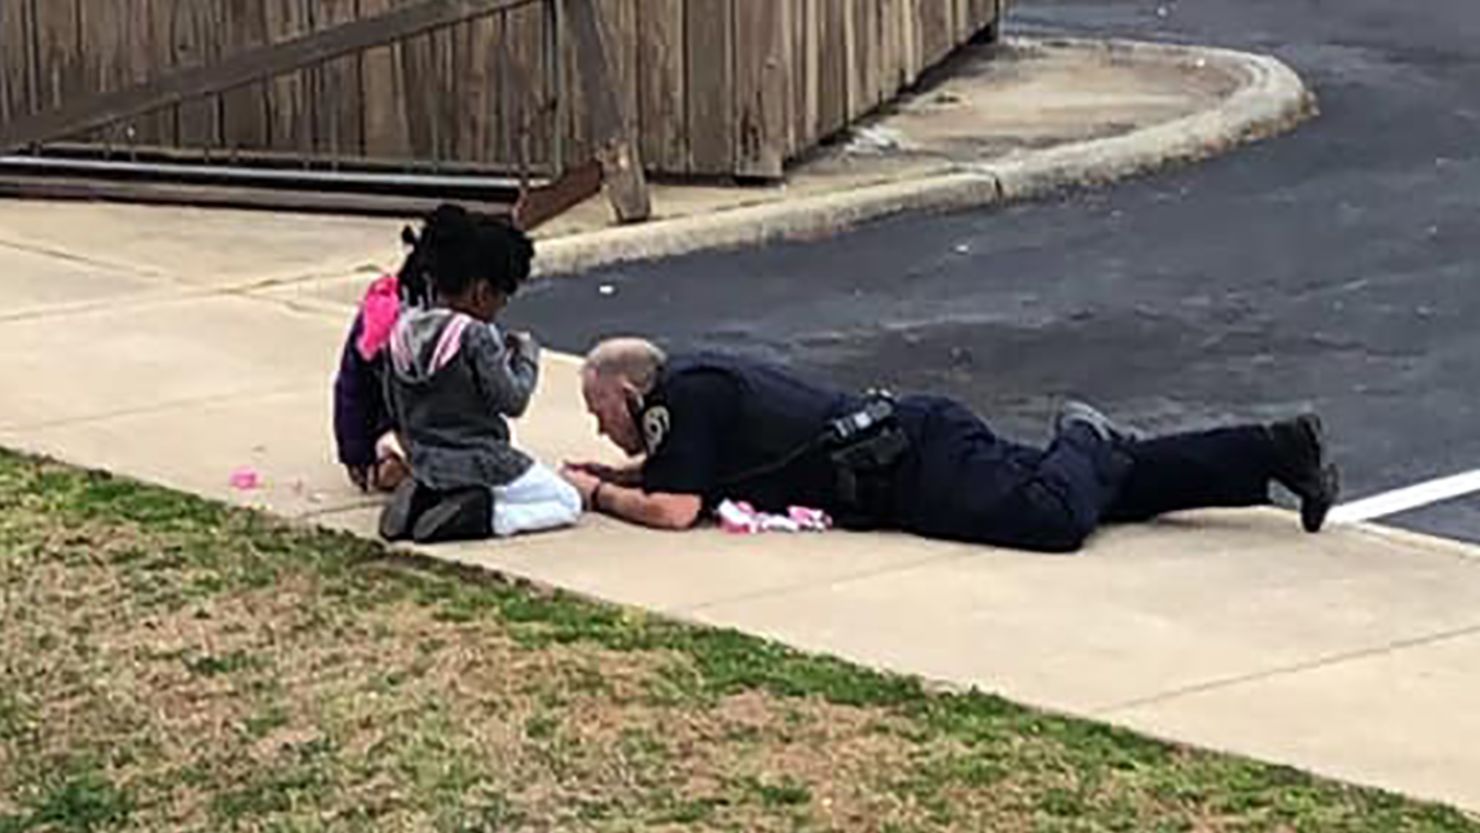 A South Hill officer lays on the ground to play with kids.